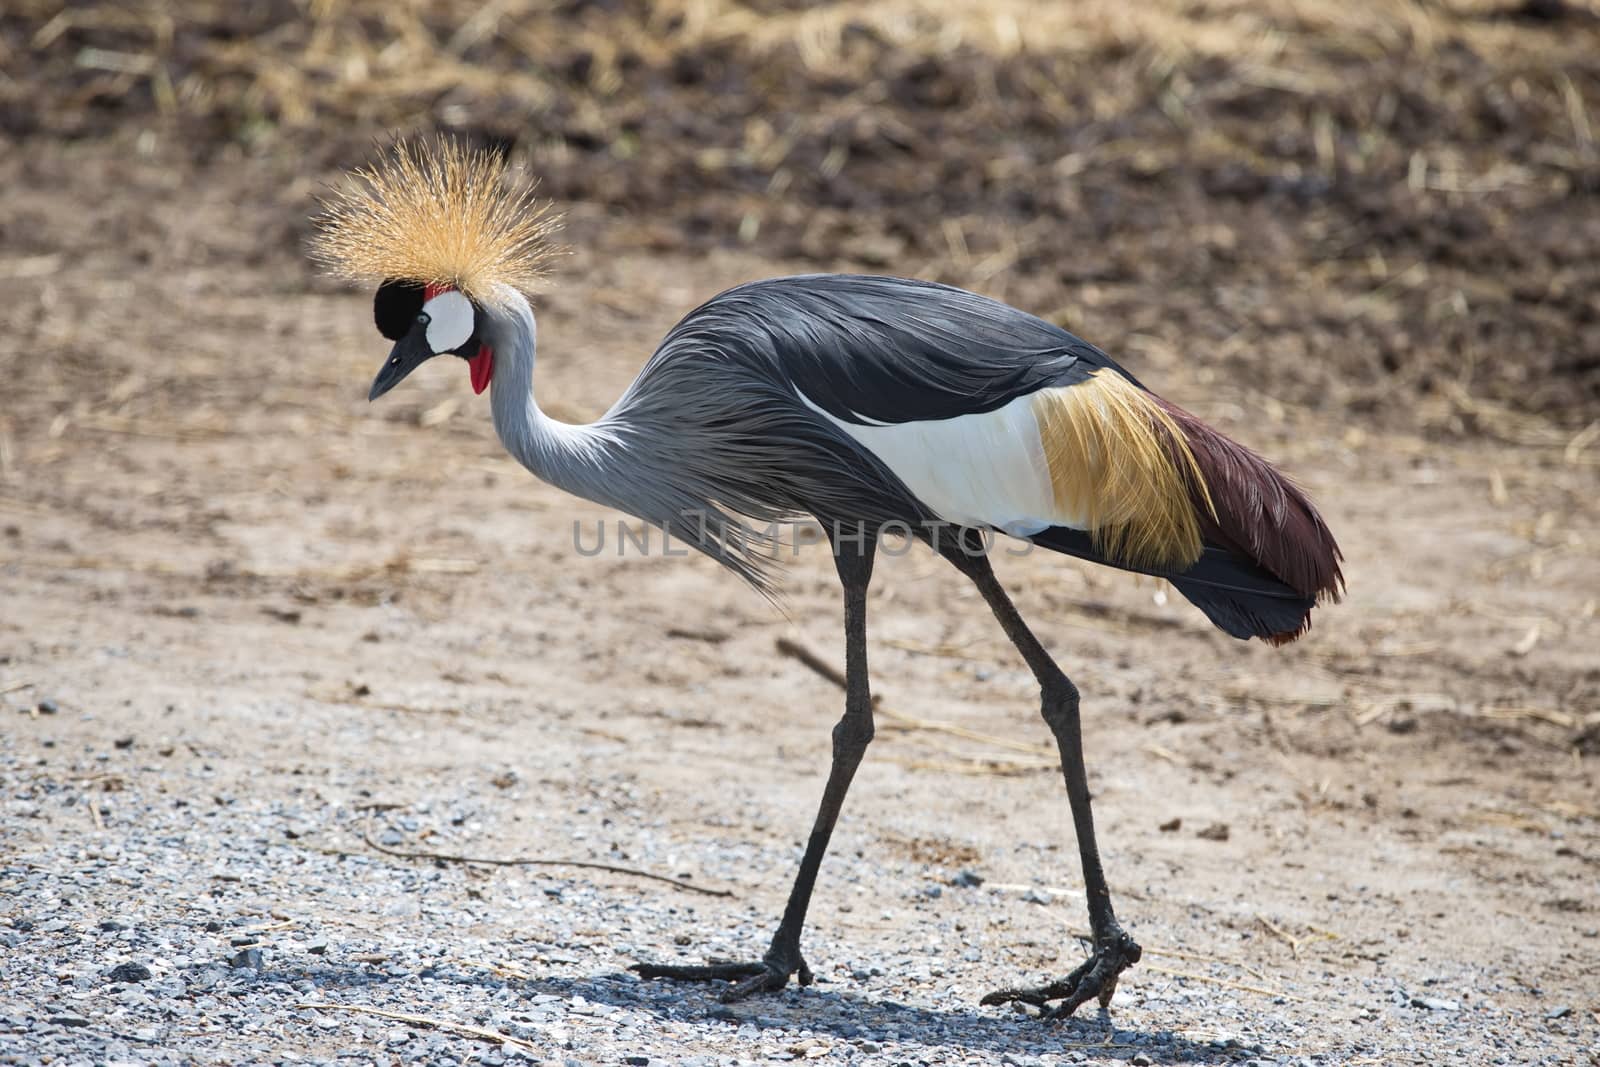 A beautiful gray crowned crane walks the ground in a zoo on a sunny day.